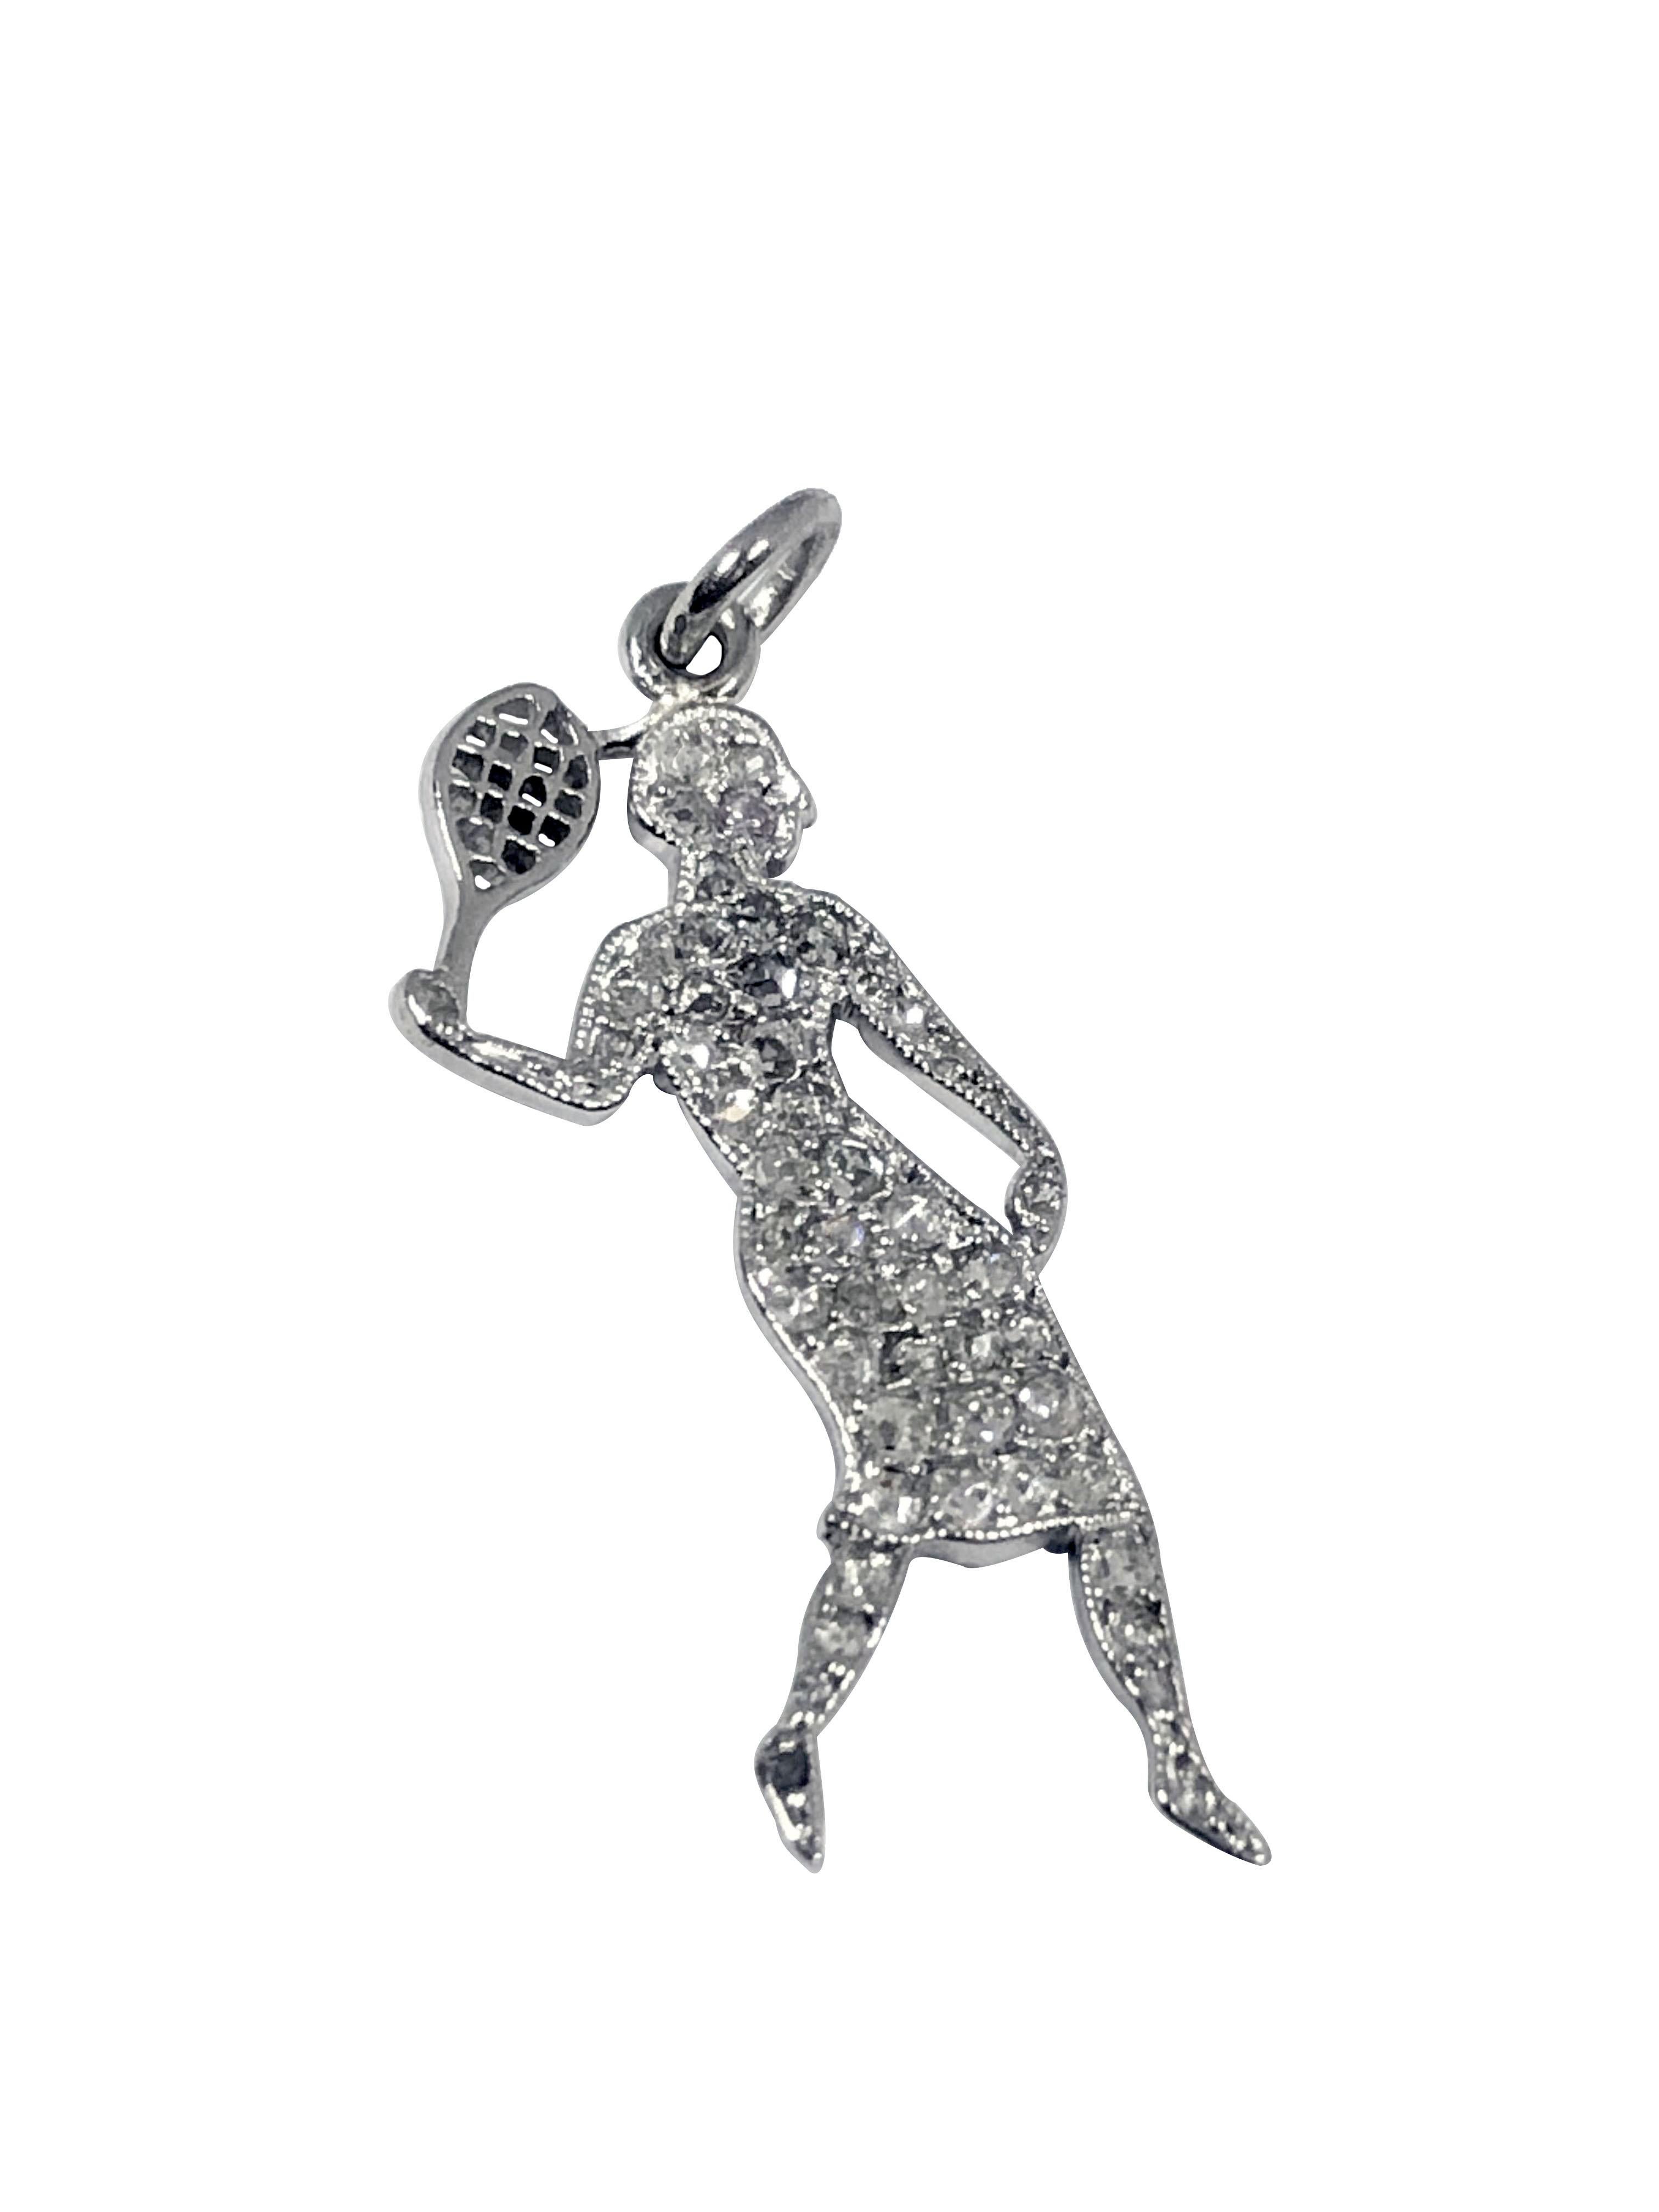 Circa 1930s Cartier France Charm Bracelet Charm in the form of a Tennis Player, measuring 1 inch in length and 3/8 inch wide, very detailed and set with Rose cut Diamonds.